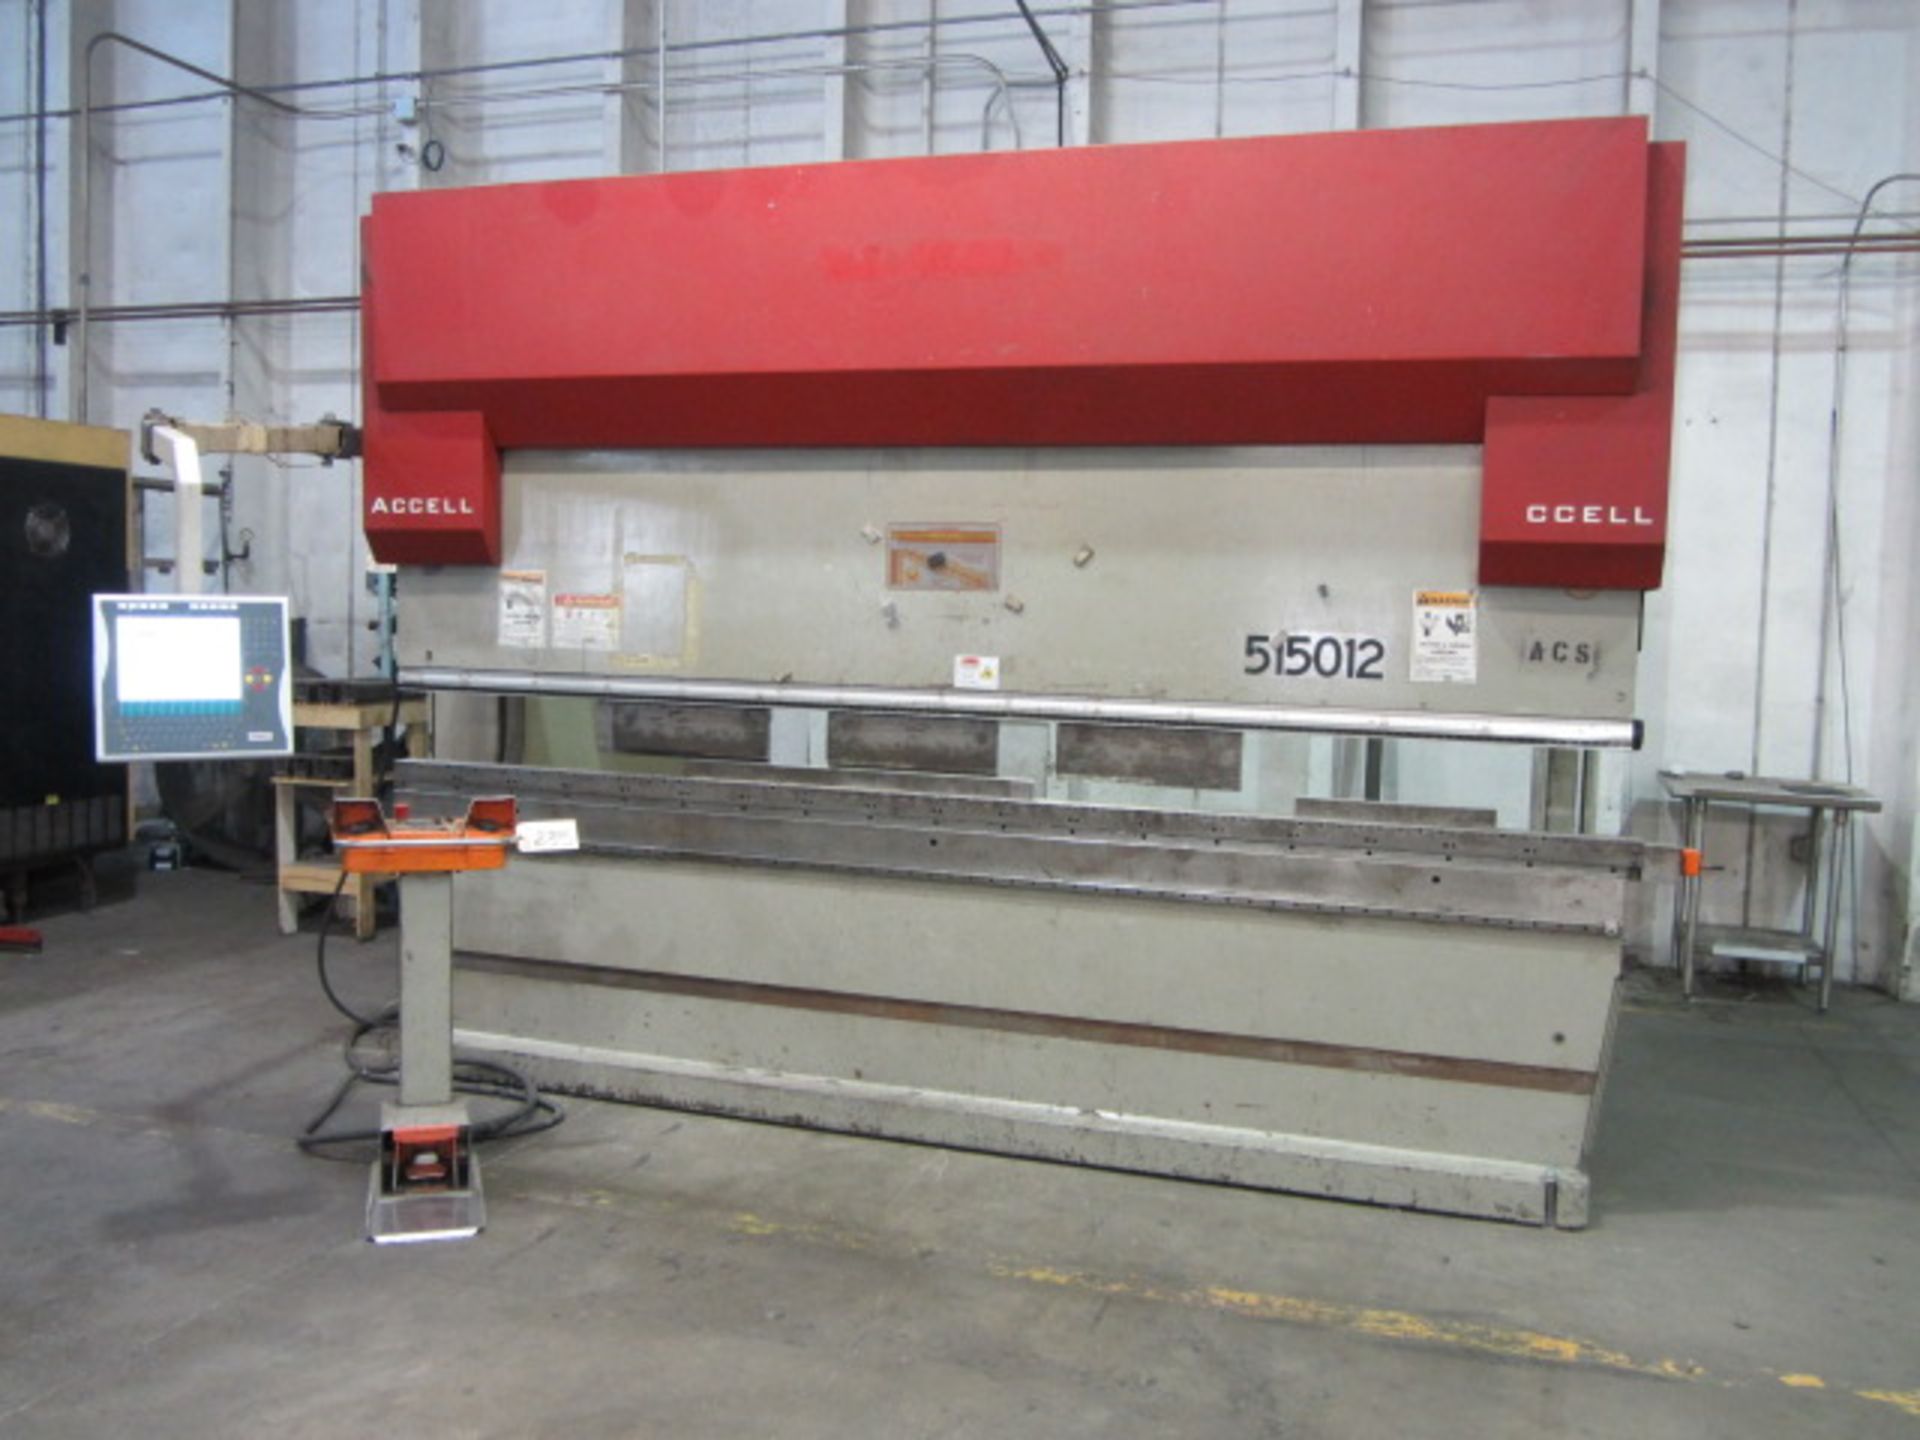 Accurpress Accell Model 515012 150 Ton x 12' 6-Axis Approx. CNC Hydraulic Press Brake with 10'